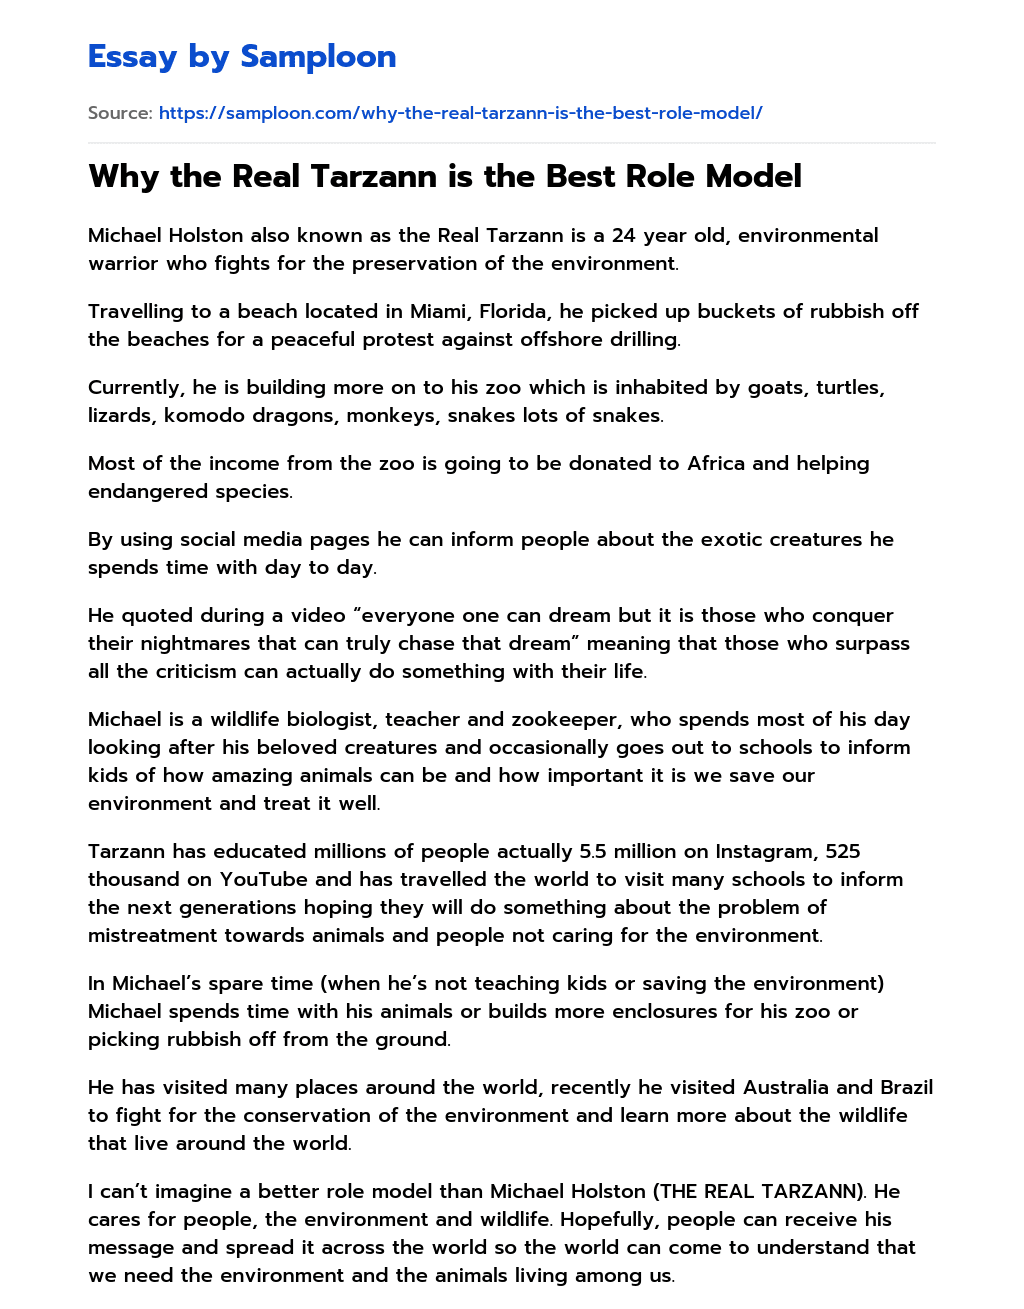 Why the Real Tarzann is the Best Role Model essay